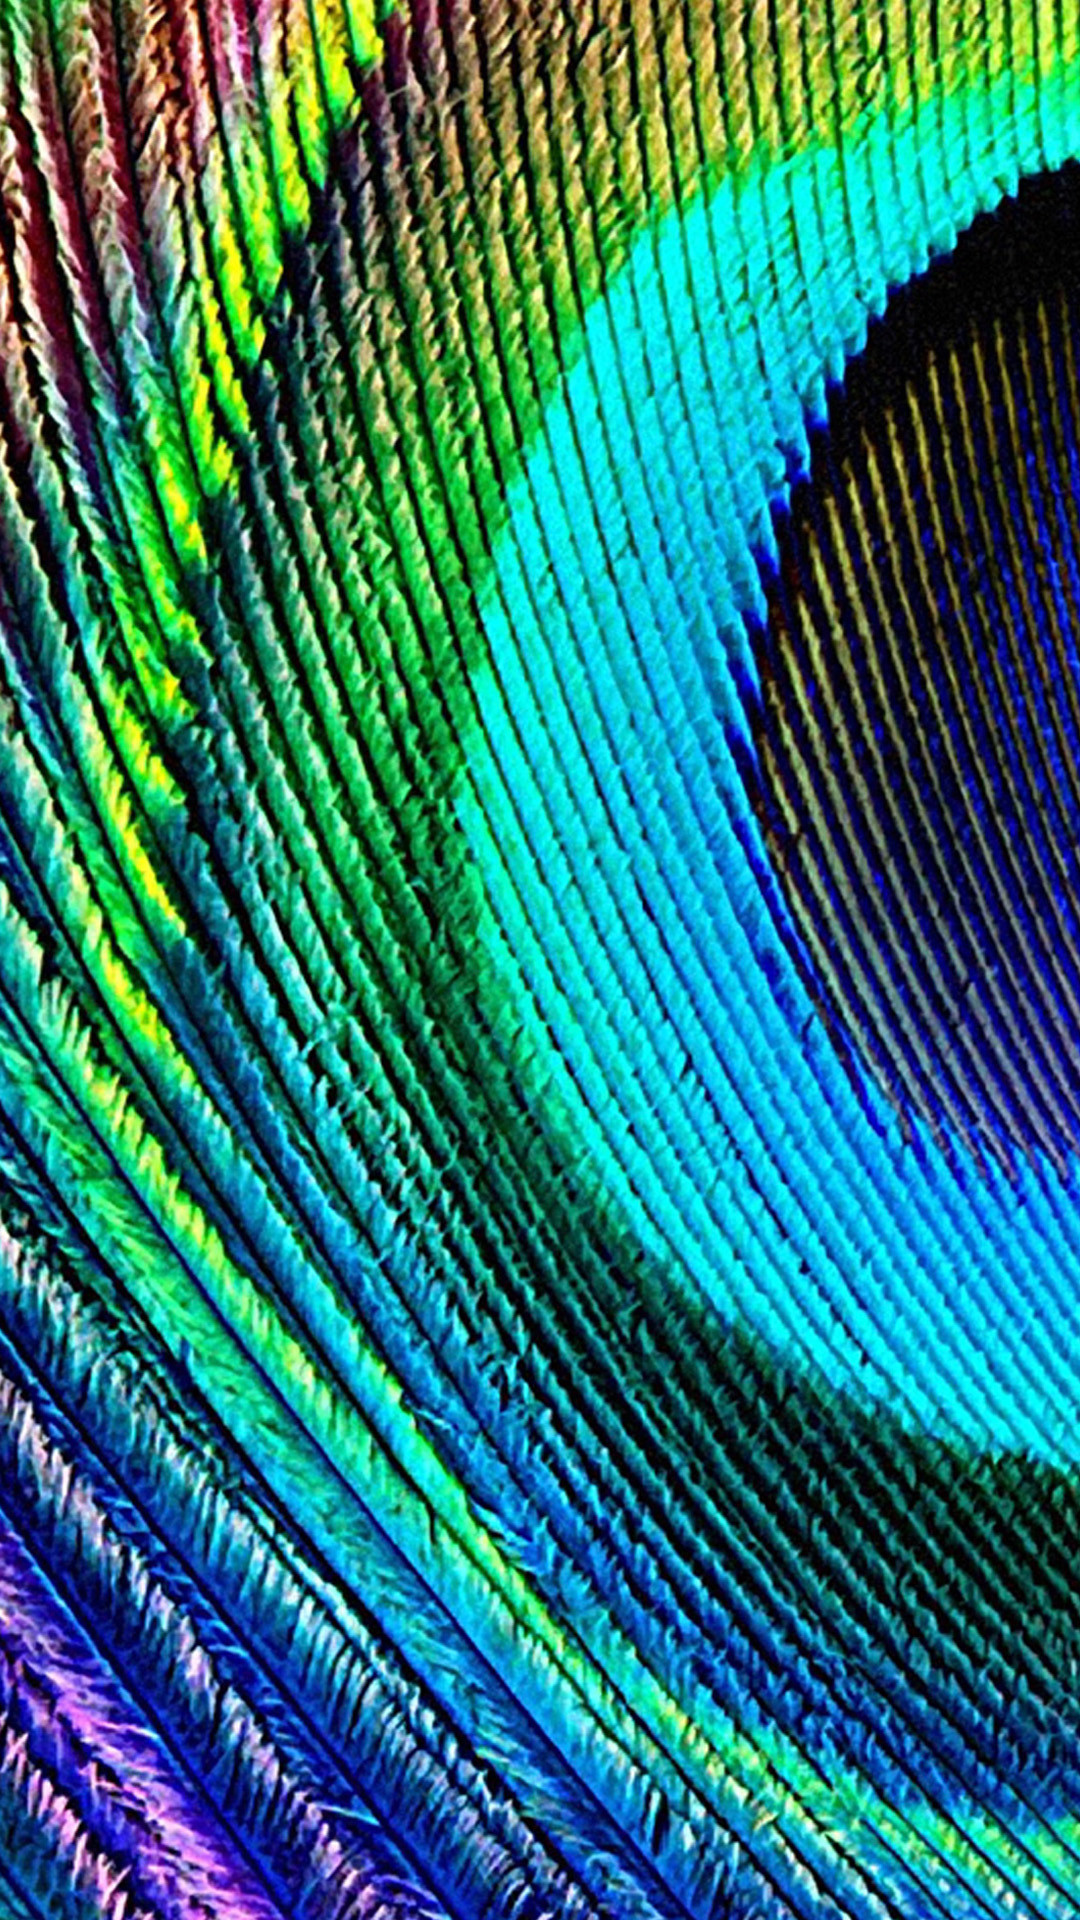 1080x1920 Peacock feather 2 Samsung Wallpapers